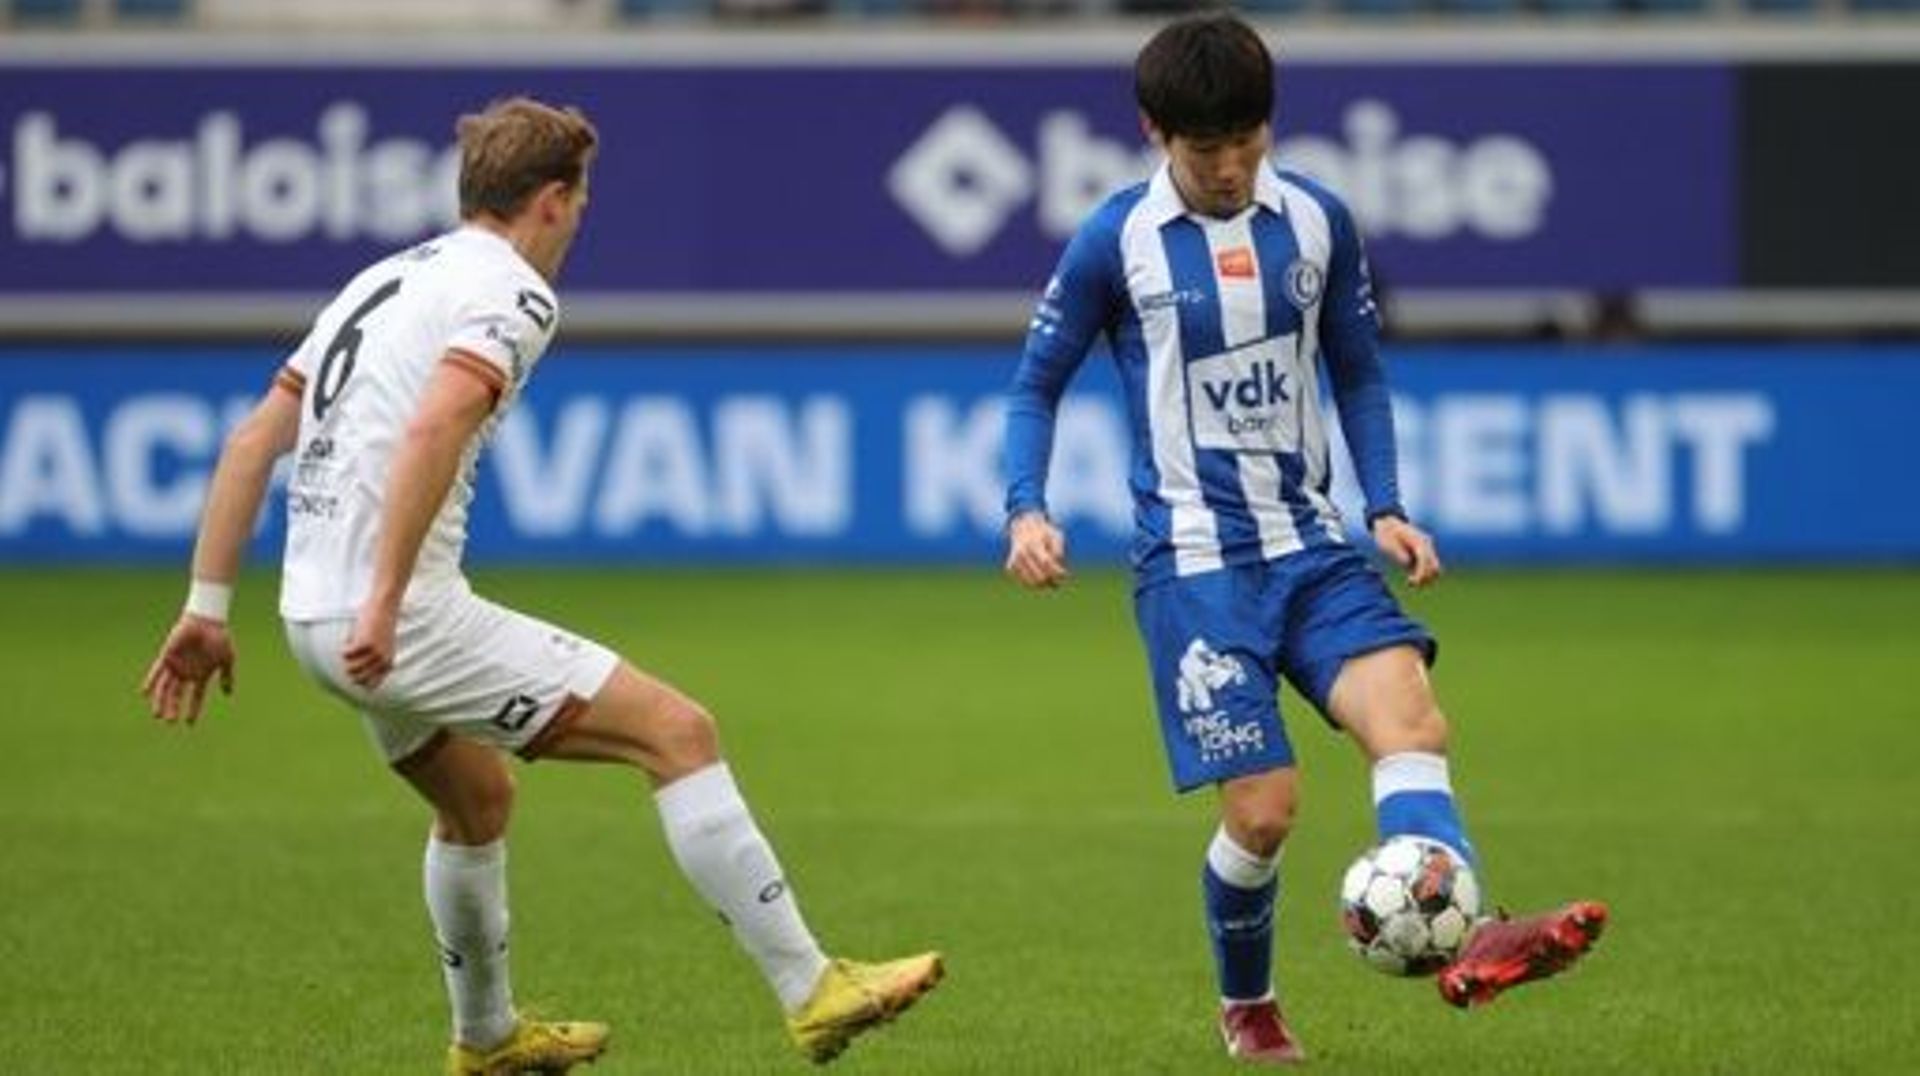 OHL’s Joren Dom and Gent’s Hyunseok Hong fight for the ball during a soccer match between KAA Gent and OH Leuven, Sunday 19 February 2023 in Gent, on day 26 of the 2022-2023 'Jupiler Pro League' first division of the Belgian championship. BELGA PHOTO VIRG